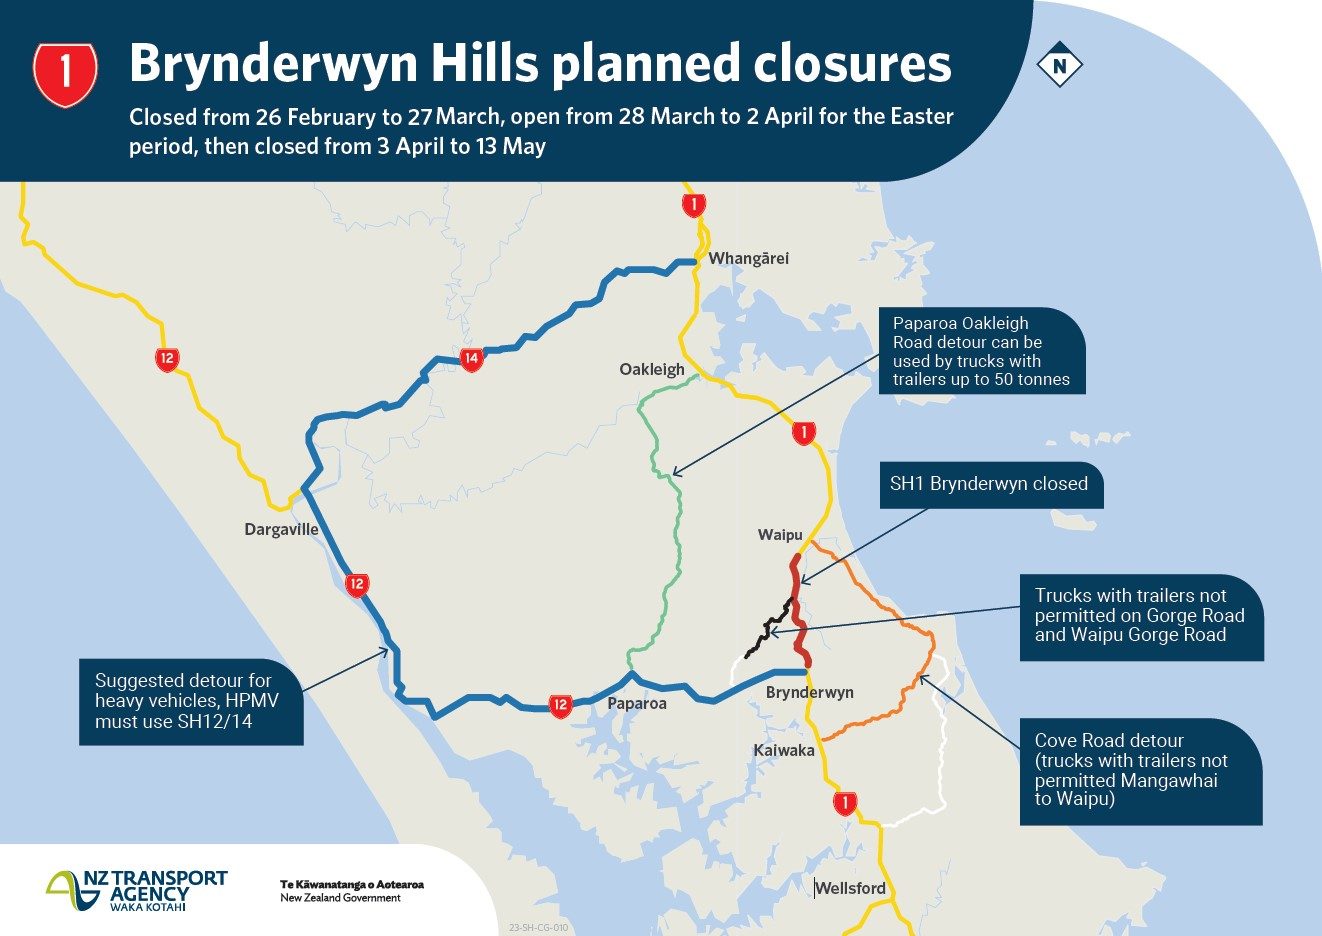 Alternative routes for traffic to bypass SH1 Brynderwyn. 